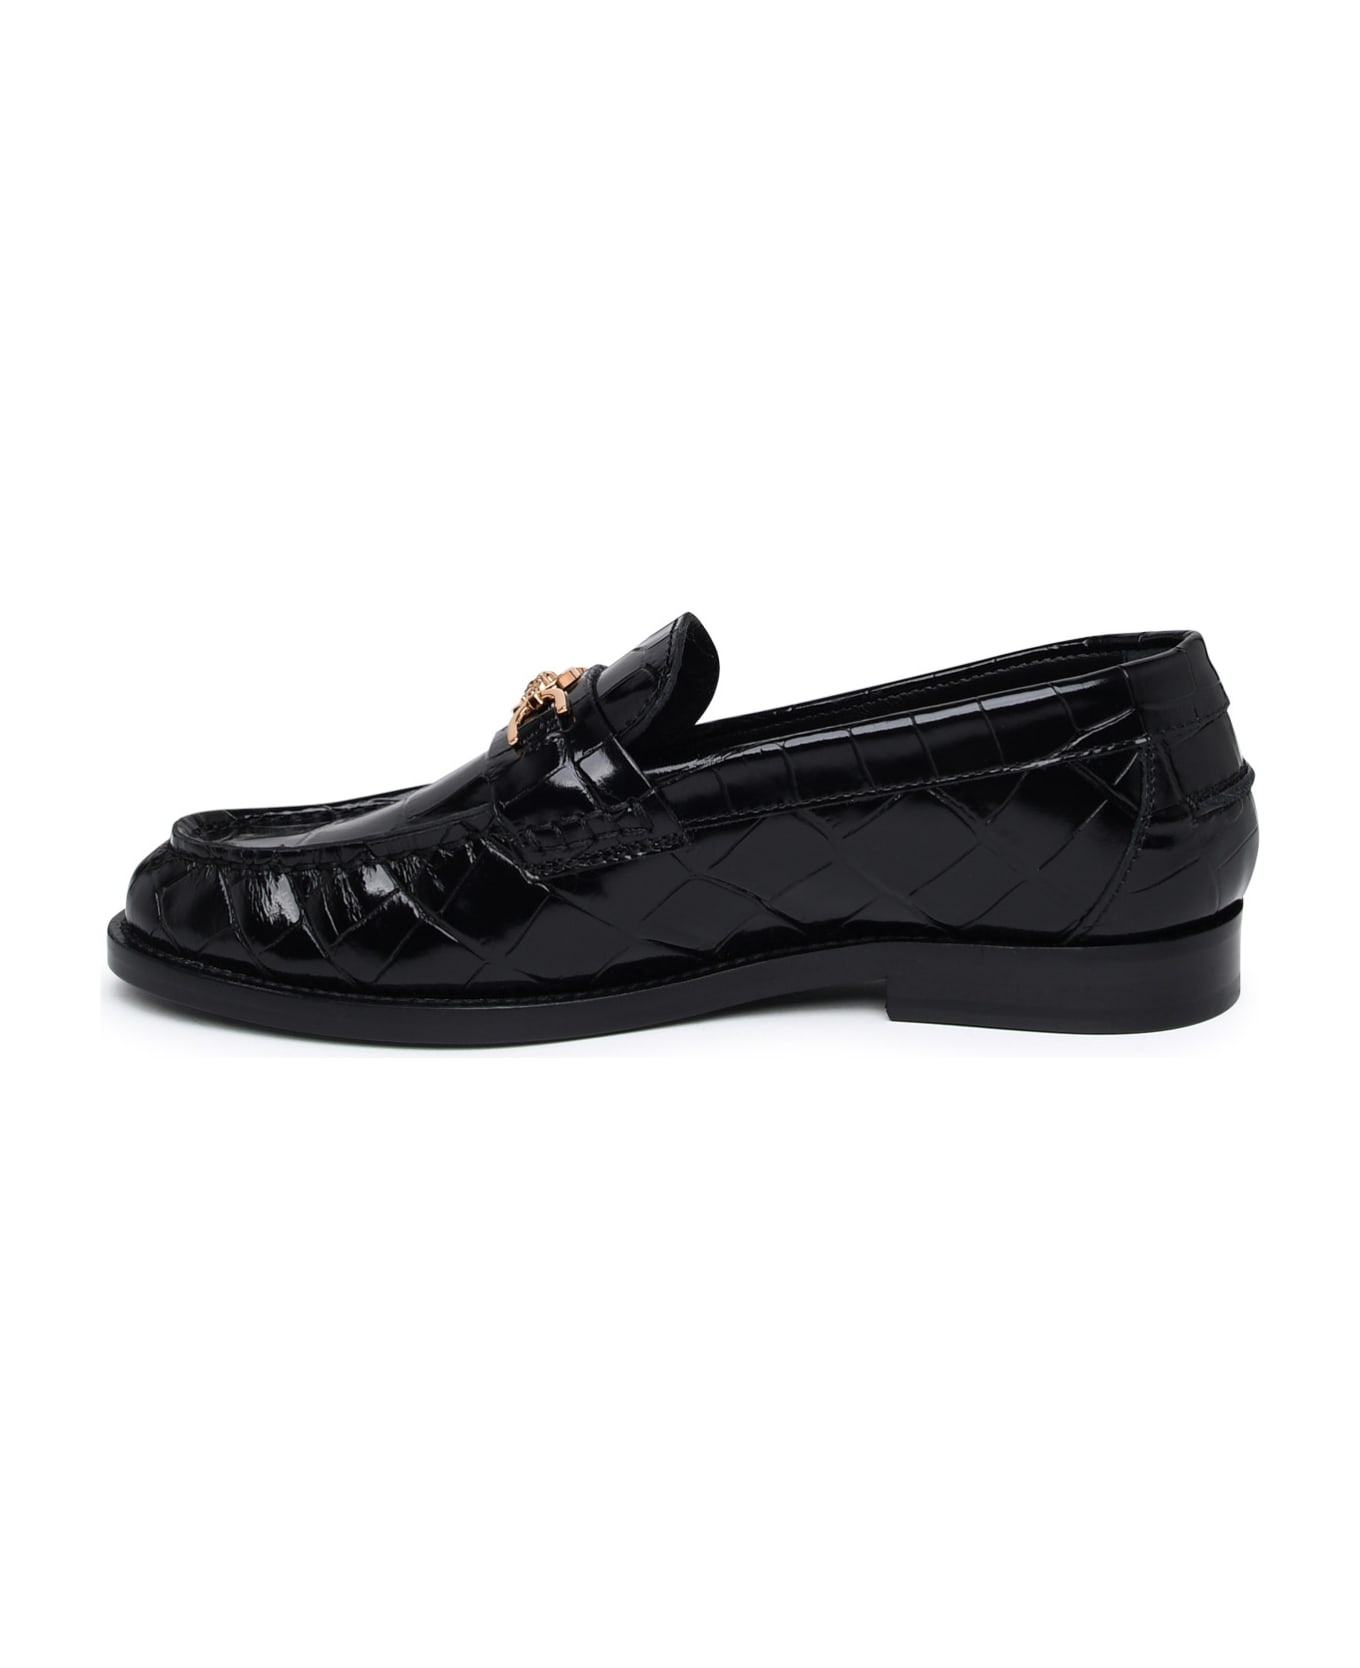 Black Leather Loafers - 3